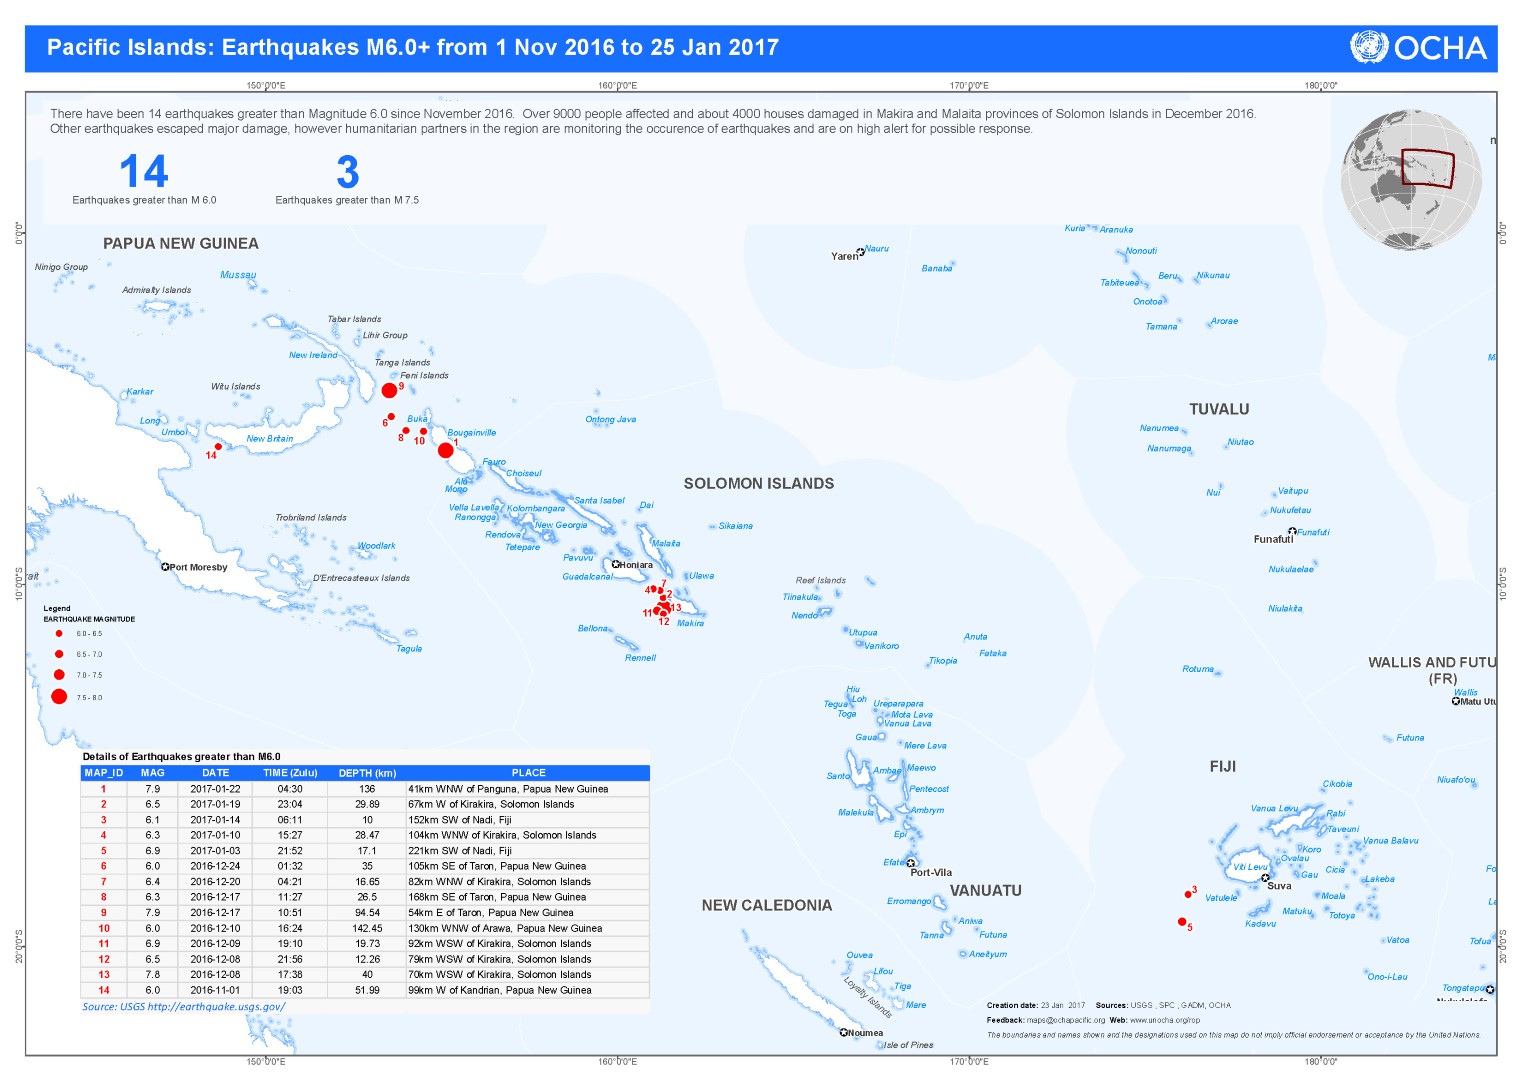 Map of recent Pacific Island earthquakes